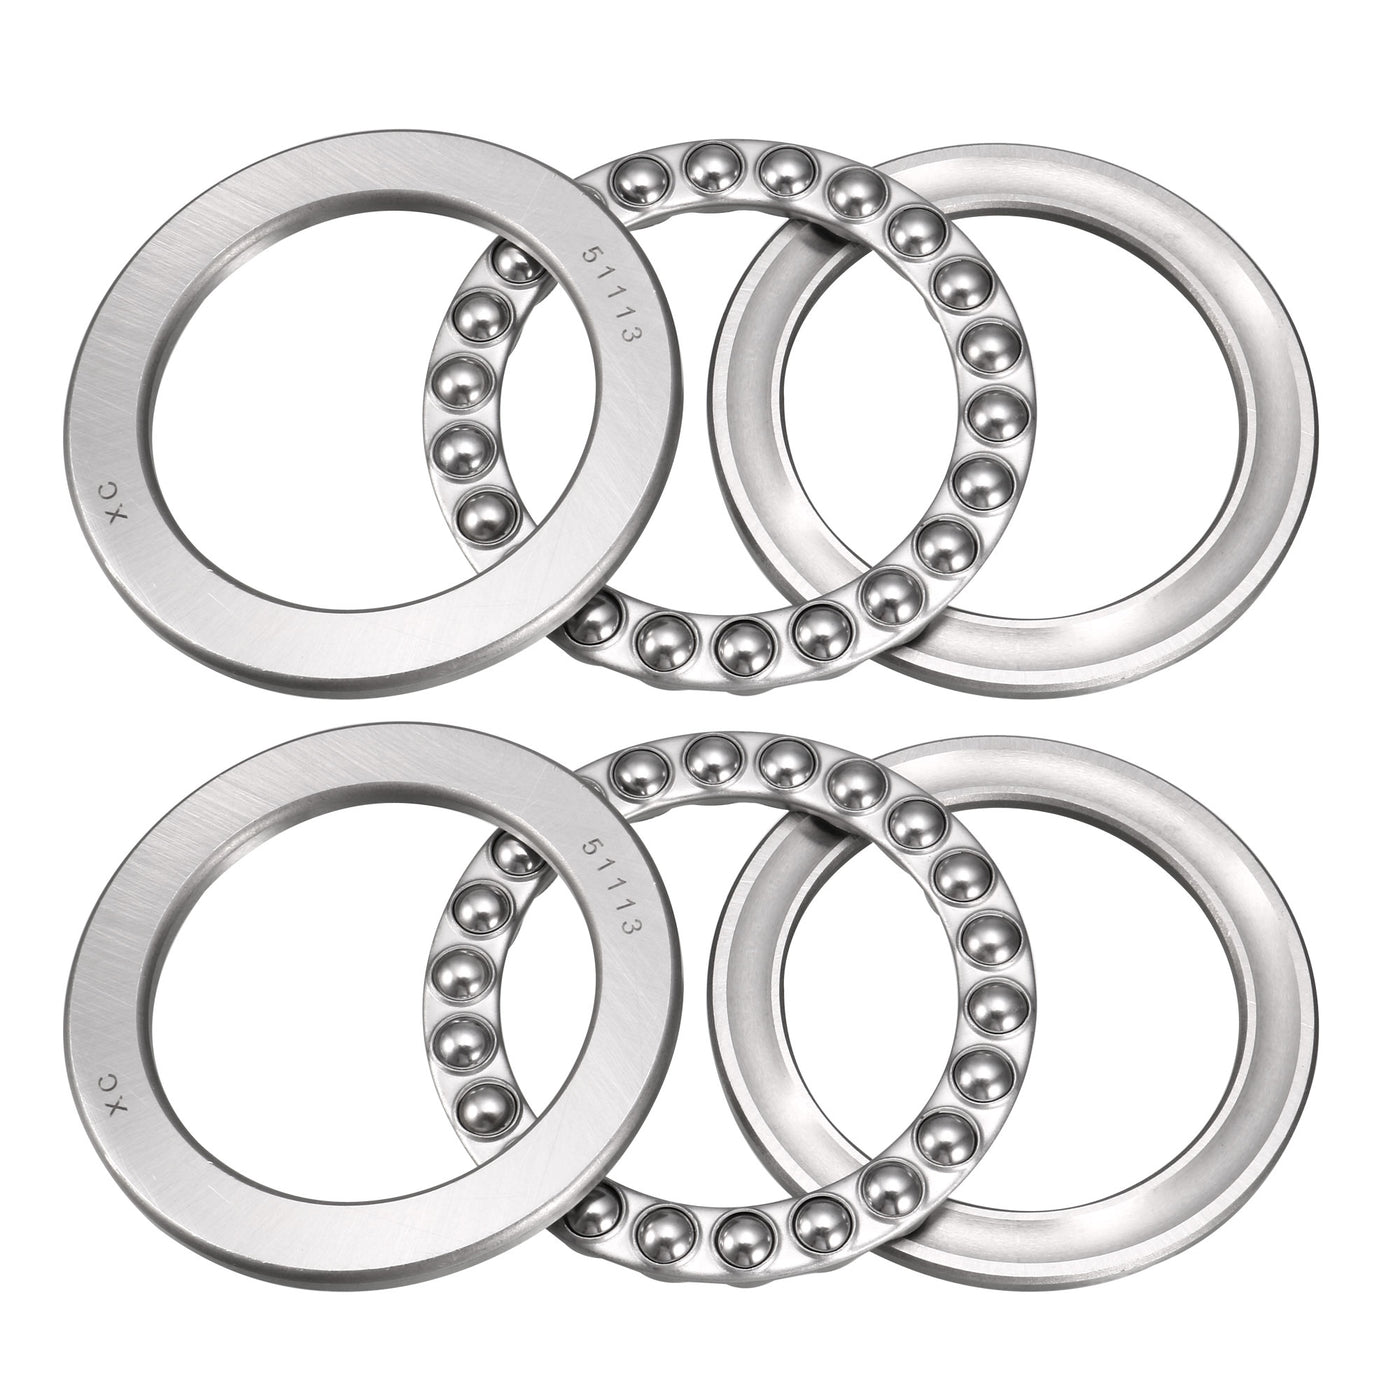 uxcell Uxcell 51113 Miniature Thrust Ball Bearing 65x90x18mm Chrome Steel with Washer 2pcs